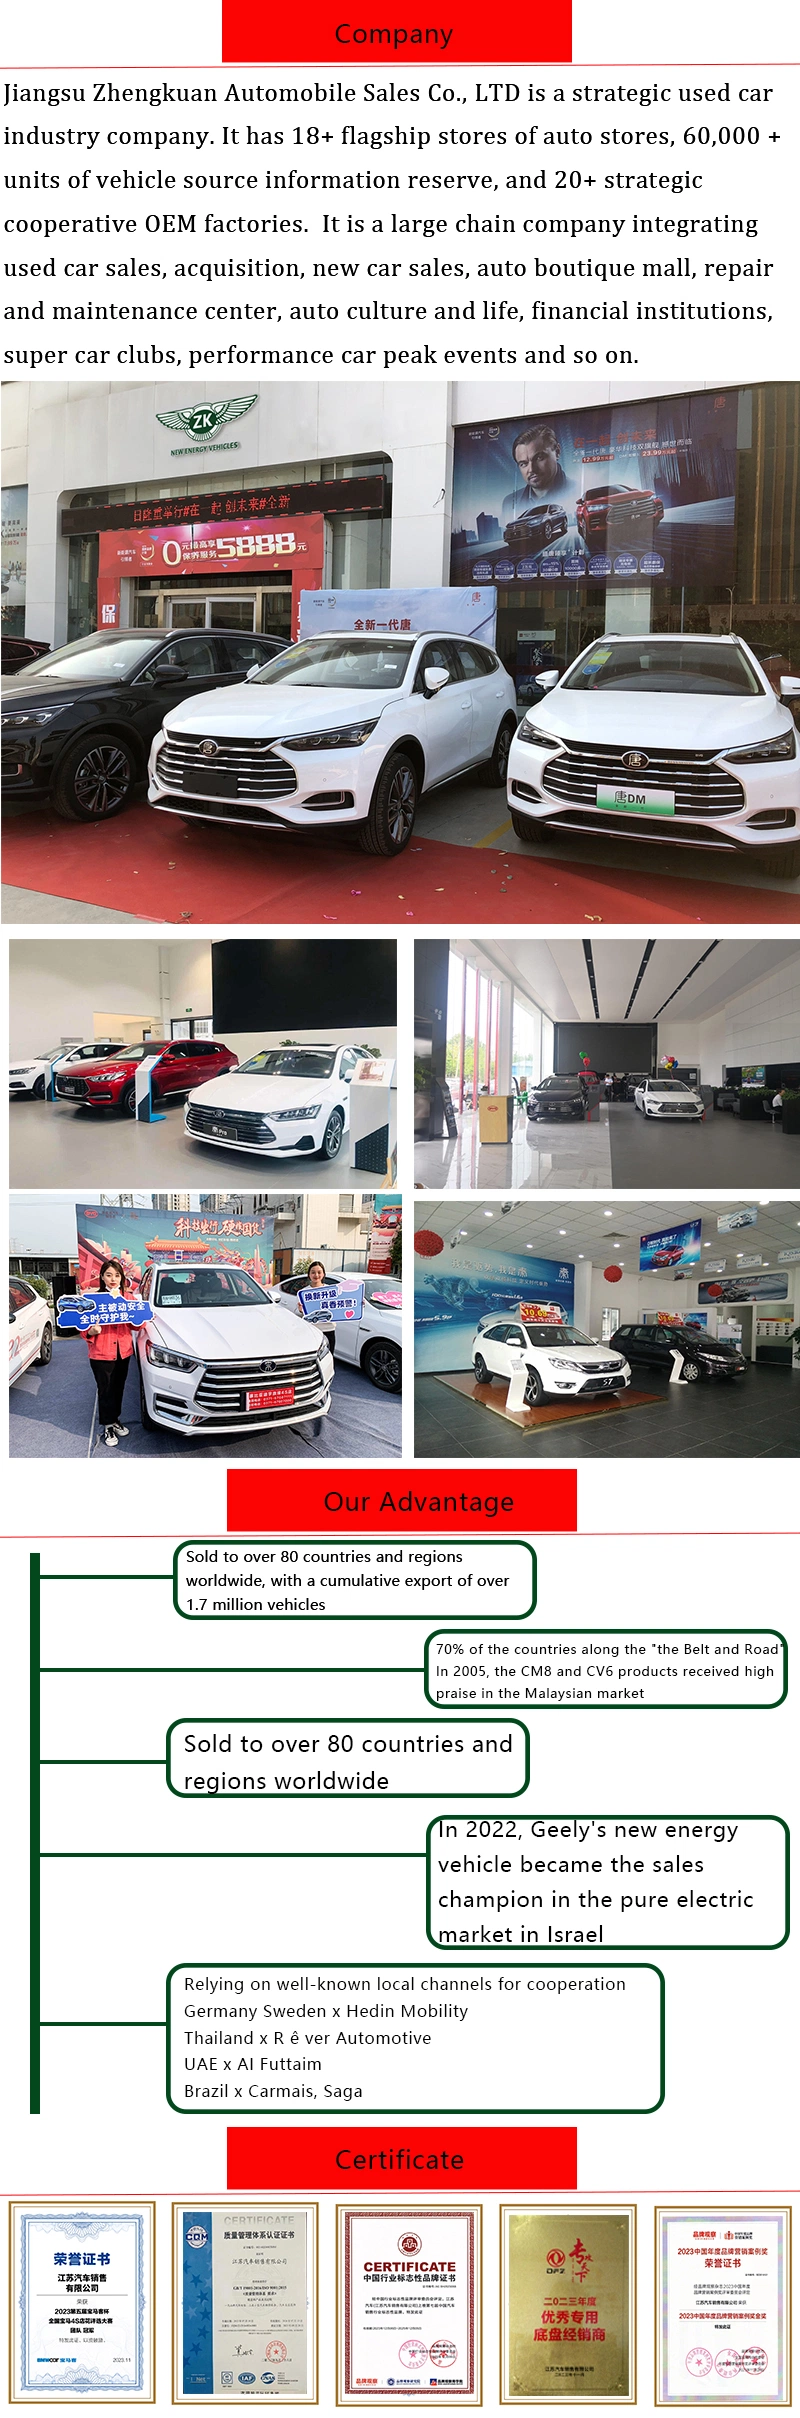 Left Hand Drive 2023 China Electric Sports Byd Yangwang U8 for Sale in Stock Vantage 5 Seats 4 Wheels Alternative Fuel Vehicle